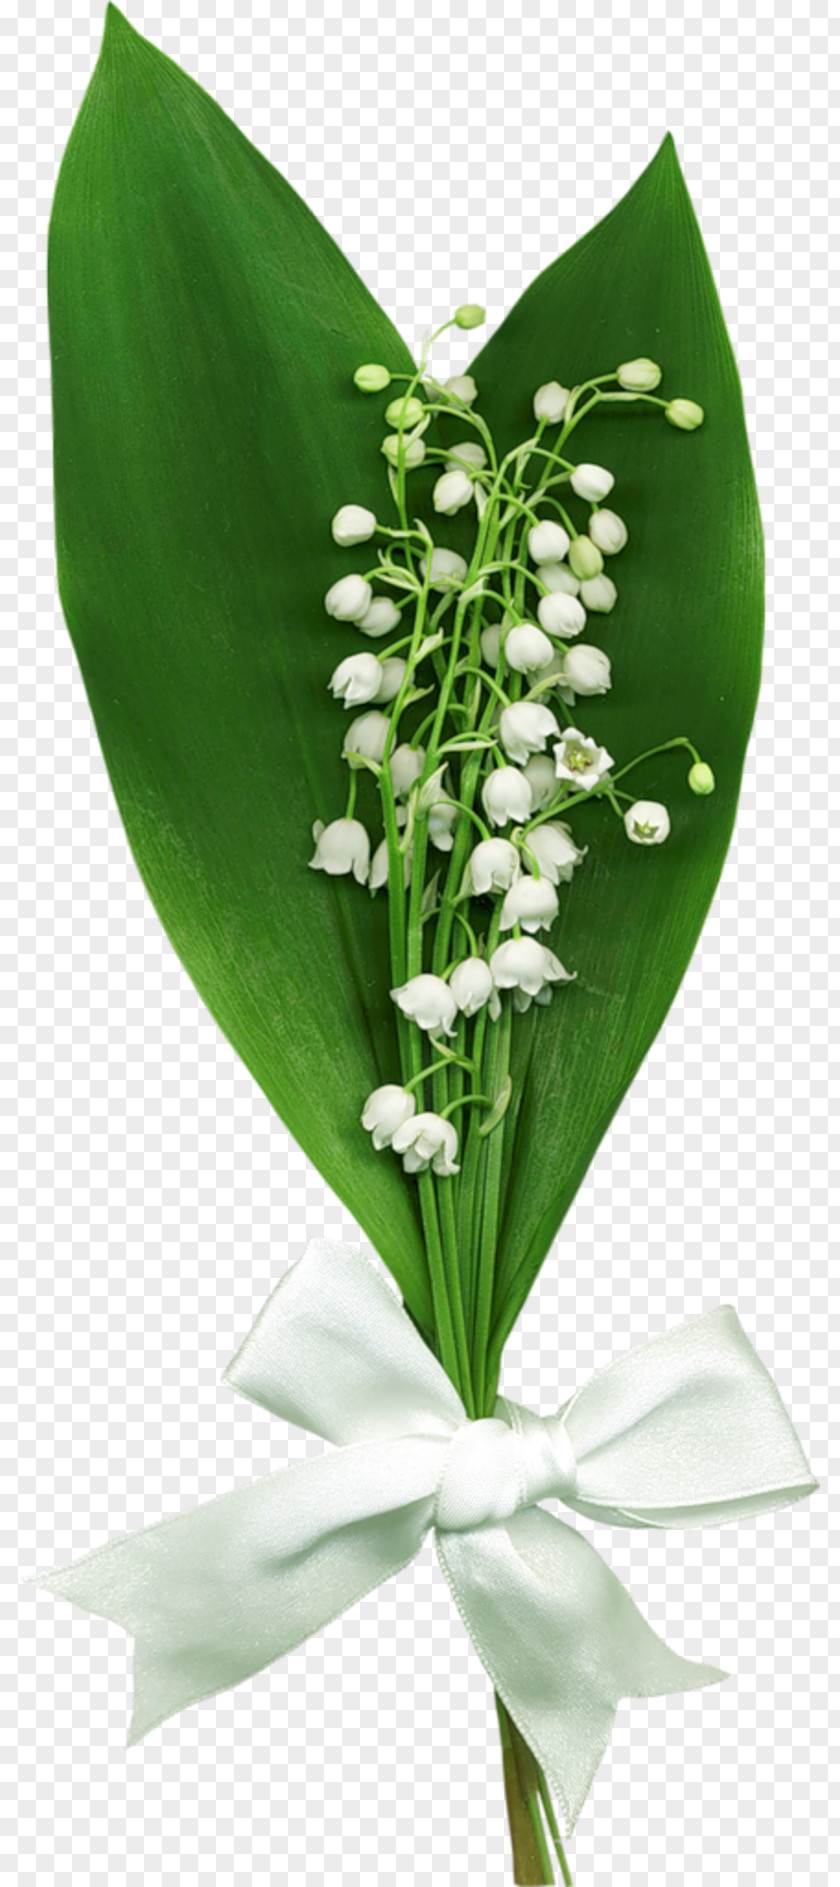 Enfant Lily Of The Valley Clip Art PNG